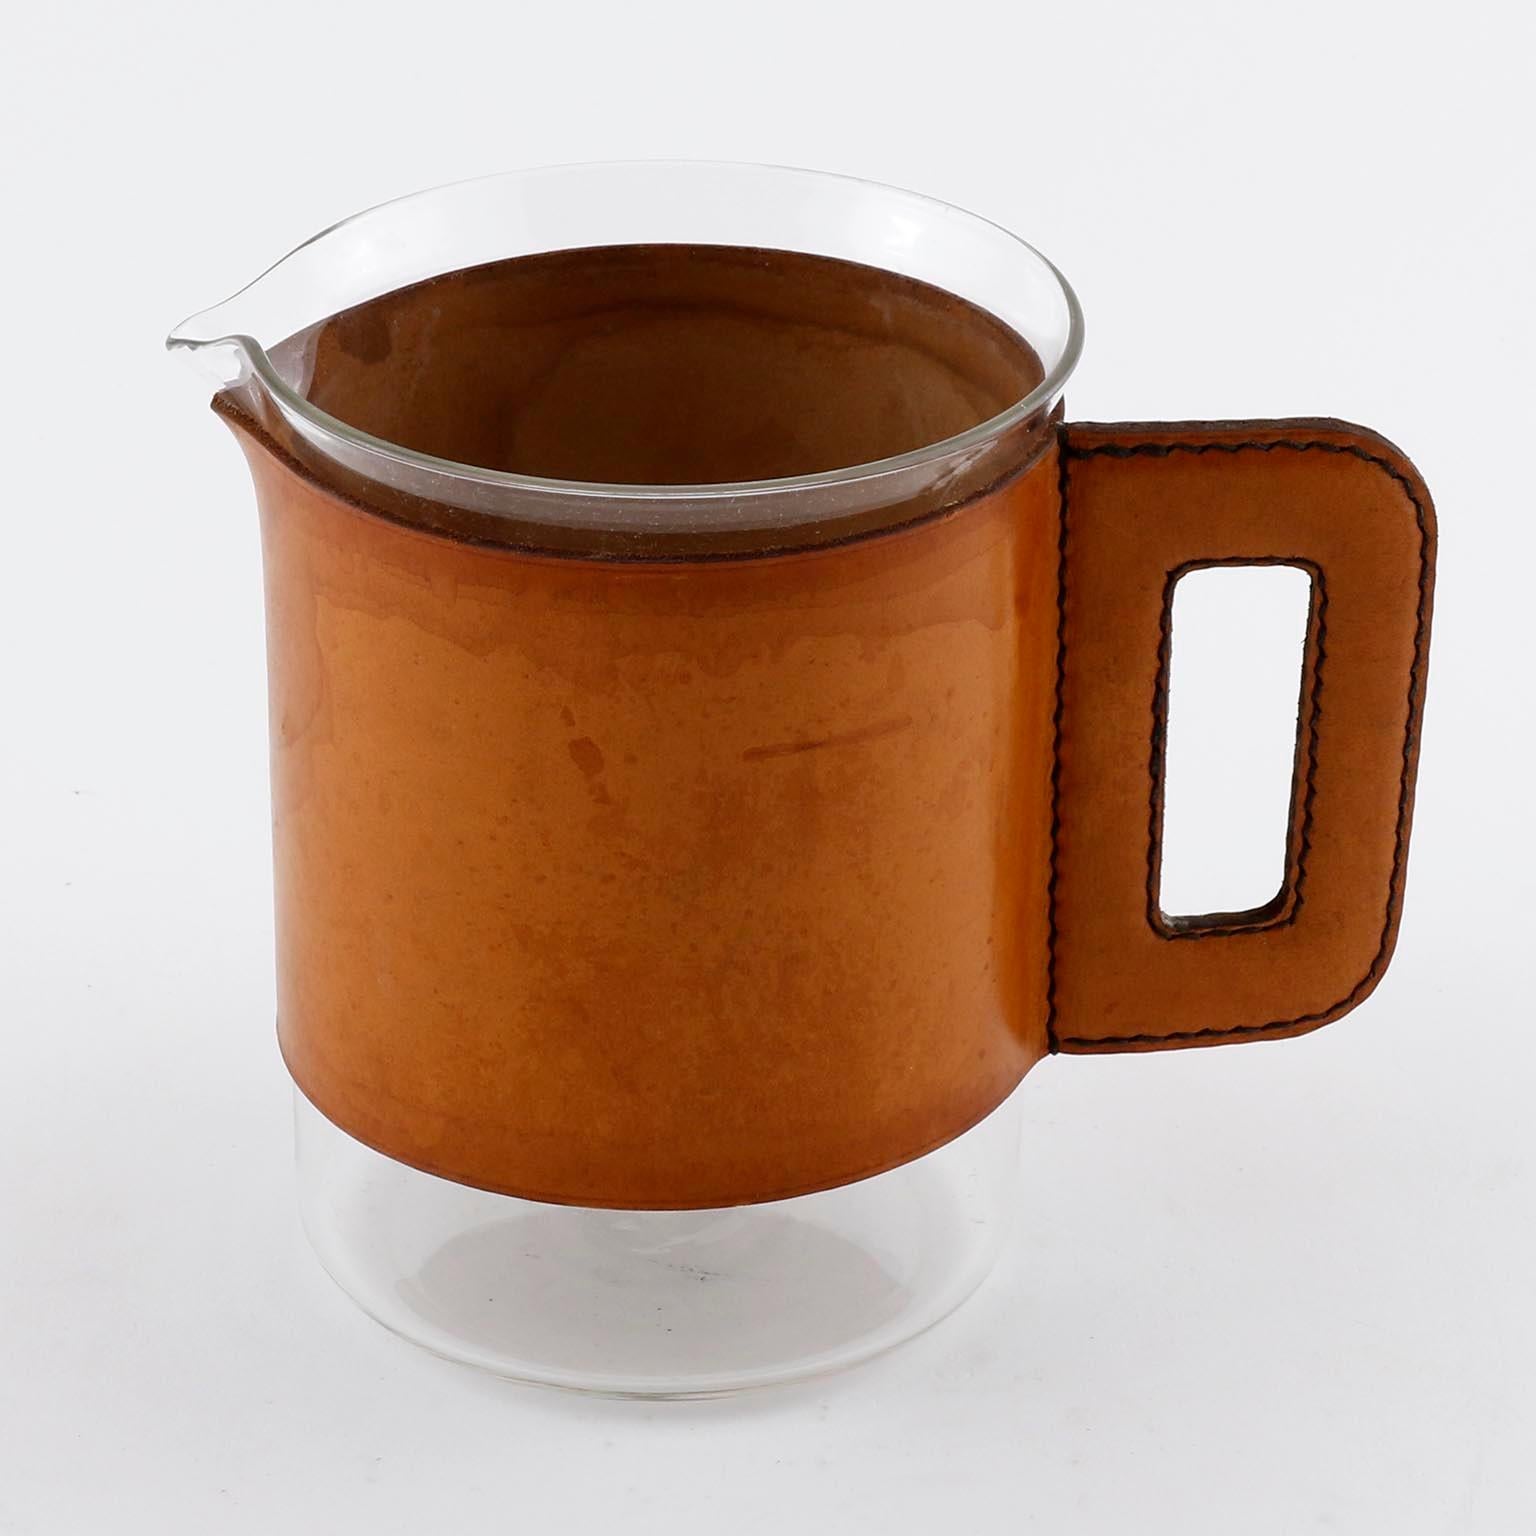 A pitcher designed by Carl Auböck, manufactured by Carl Auböck workshop in midcentury, Vienna, circa 1950.
An authentic handmade piece in very good original condition.

Carl Auböck, Carl Auboeck, Carl Aubock.